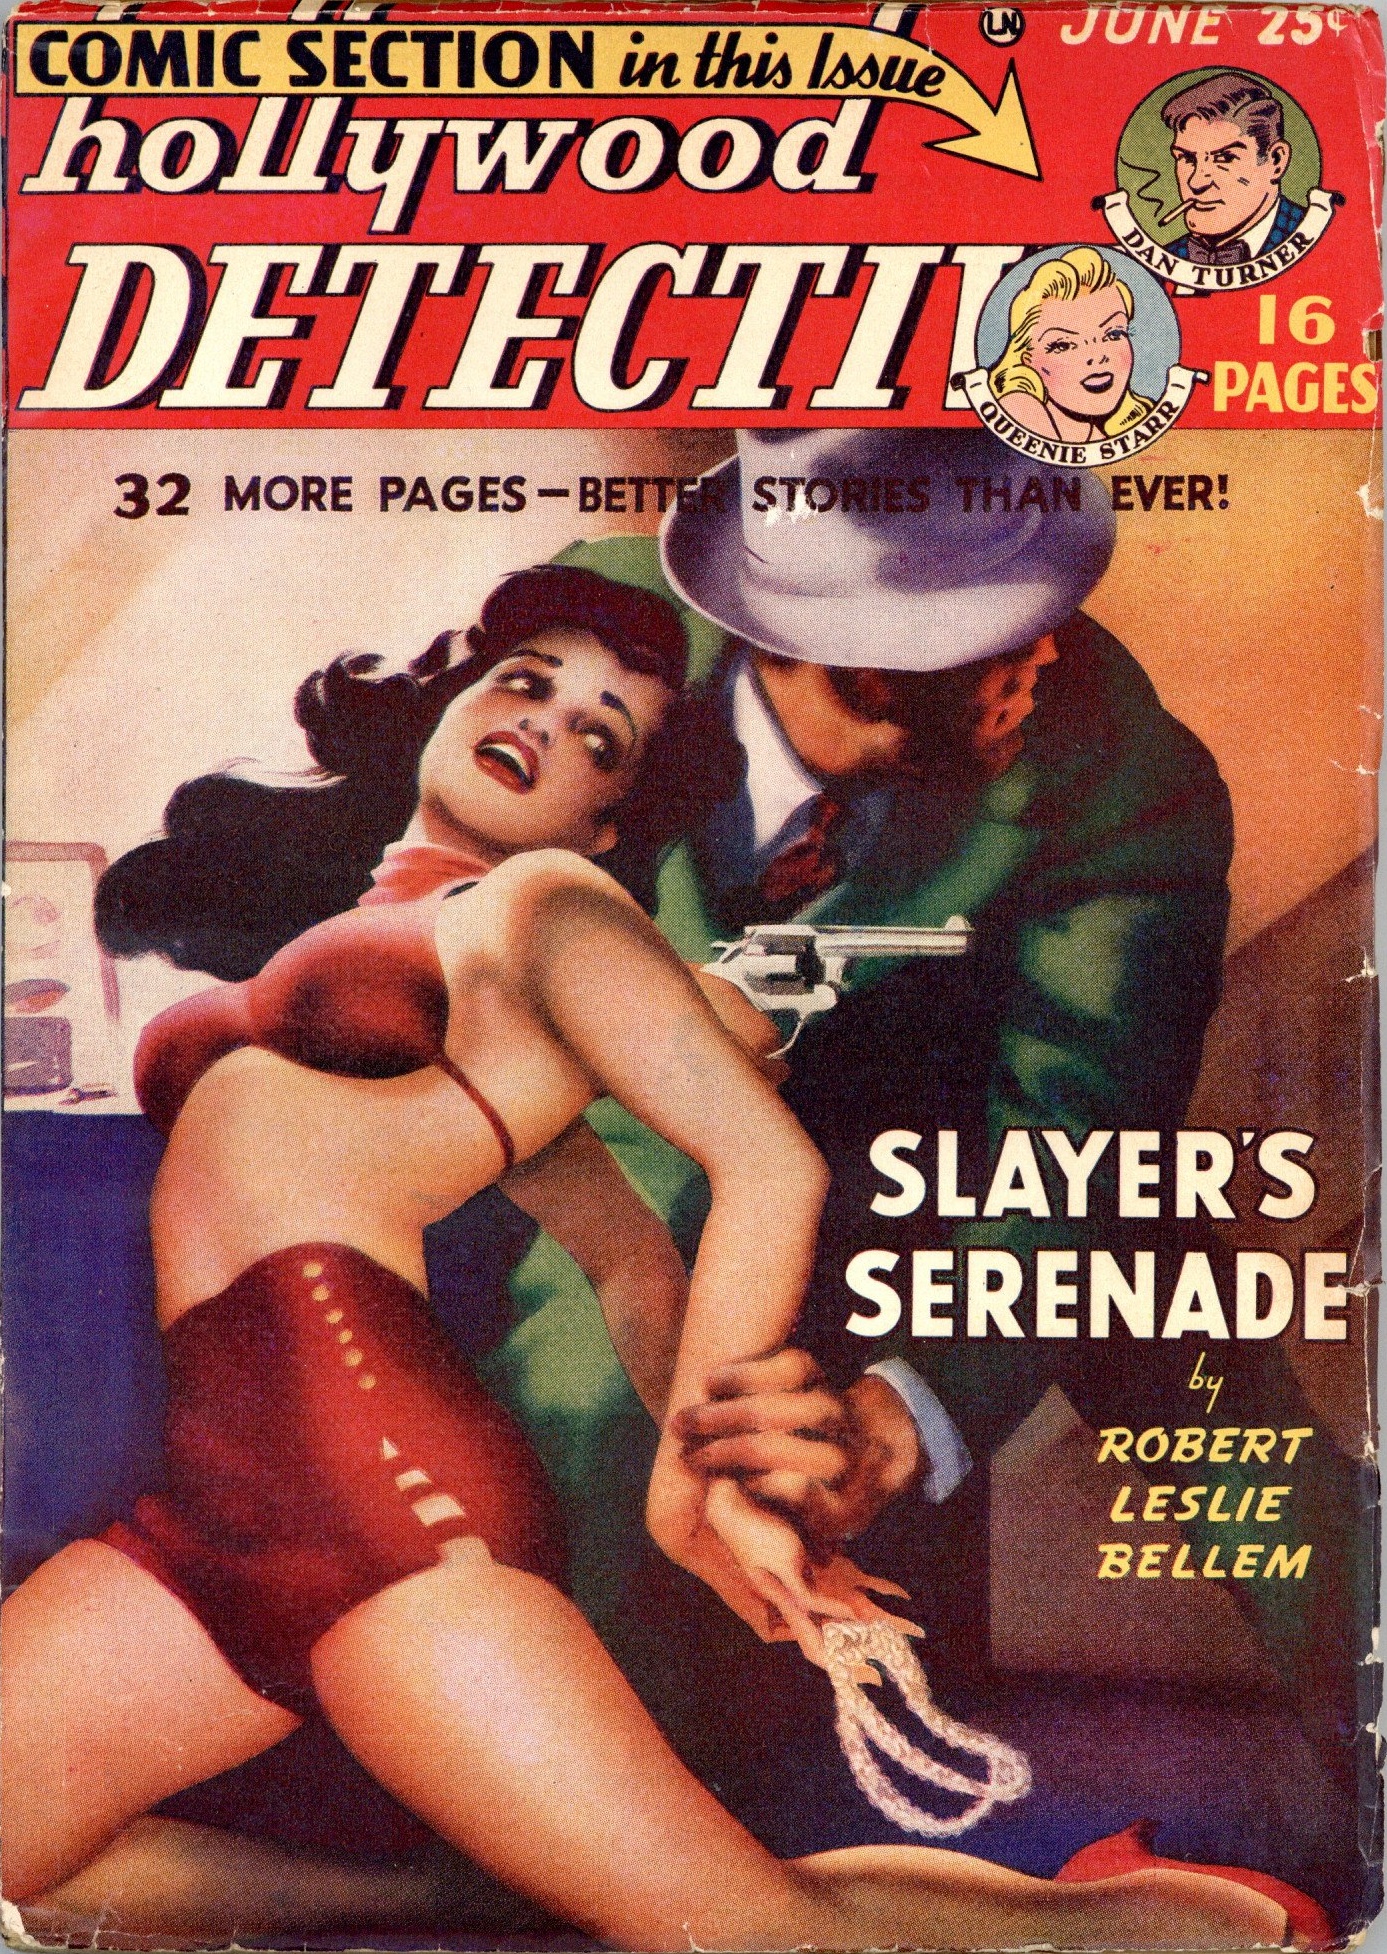 Hollywood Detective June 1949